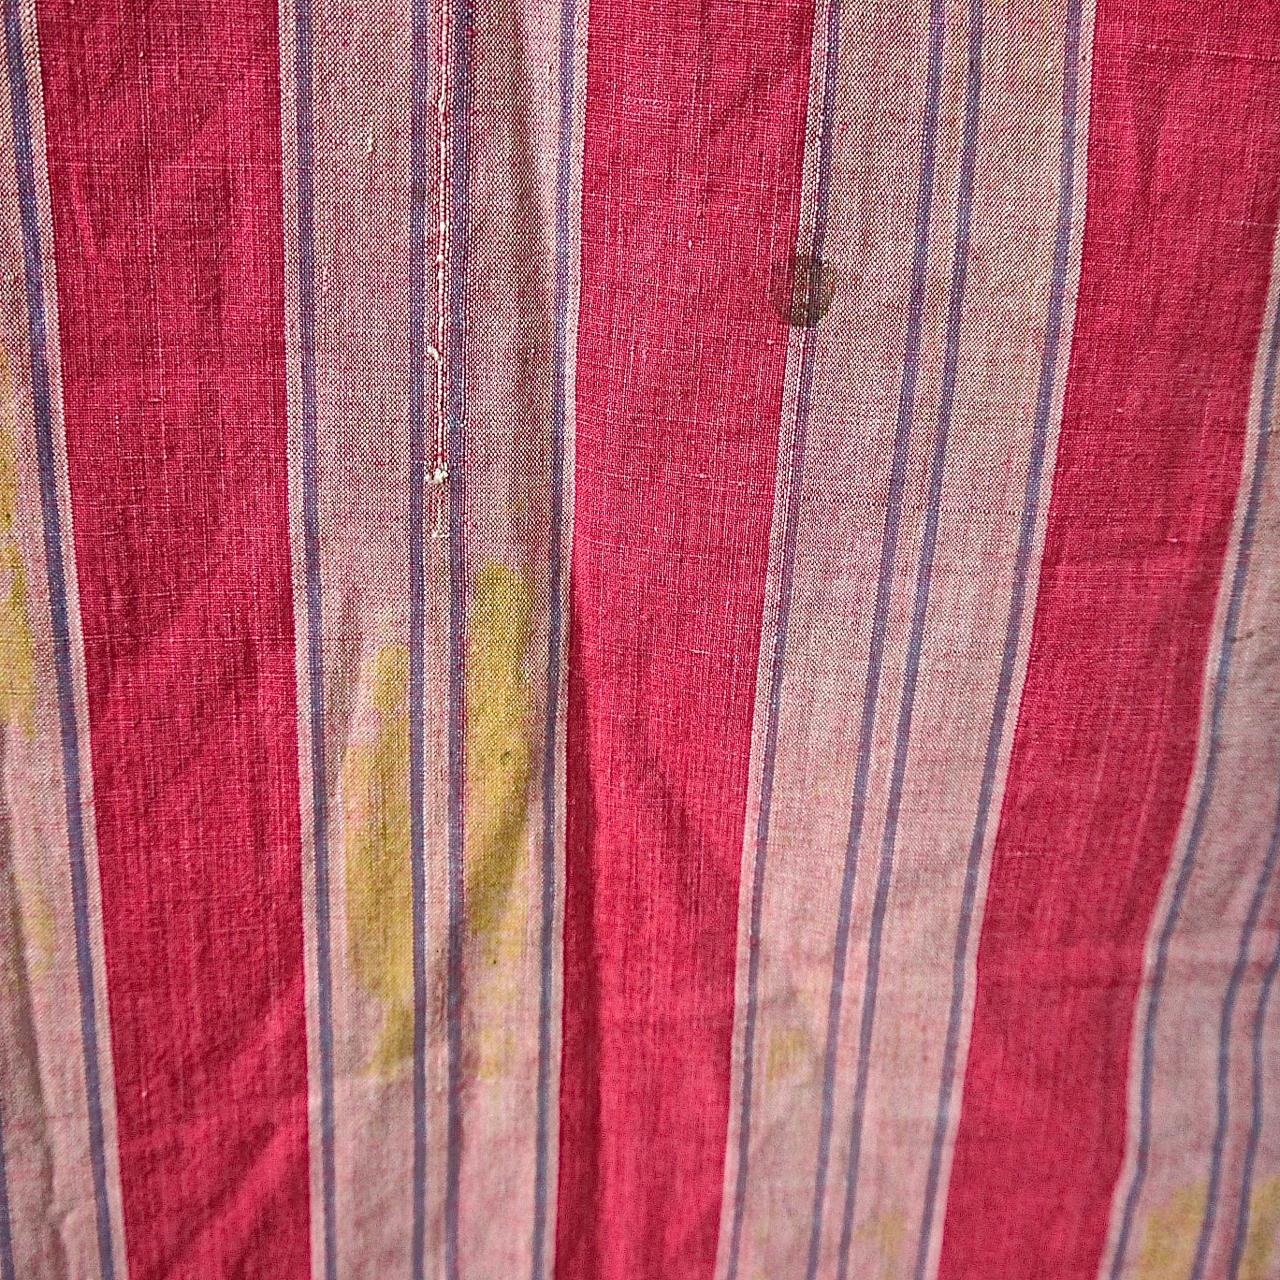 Two Red Striped Large Cotton Curtains, French, Late 18th Century For Sale 3